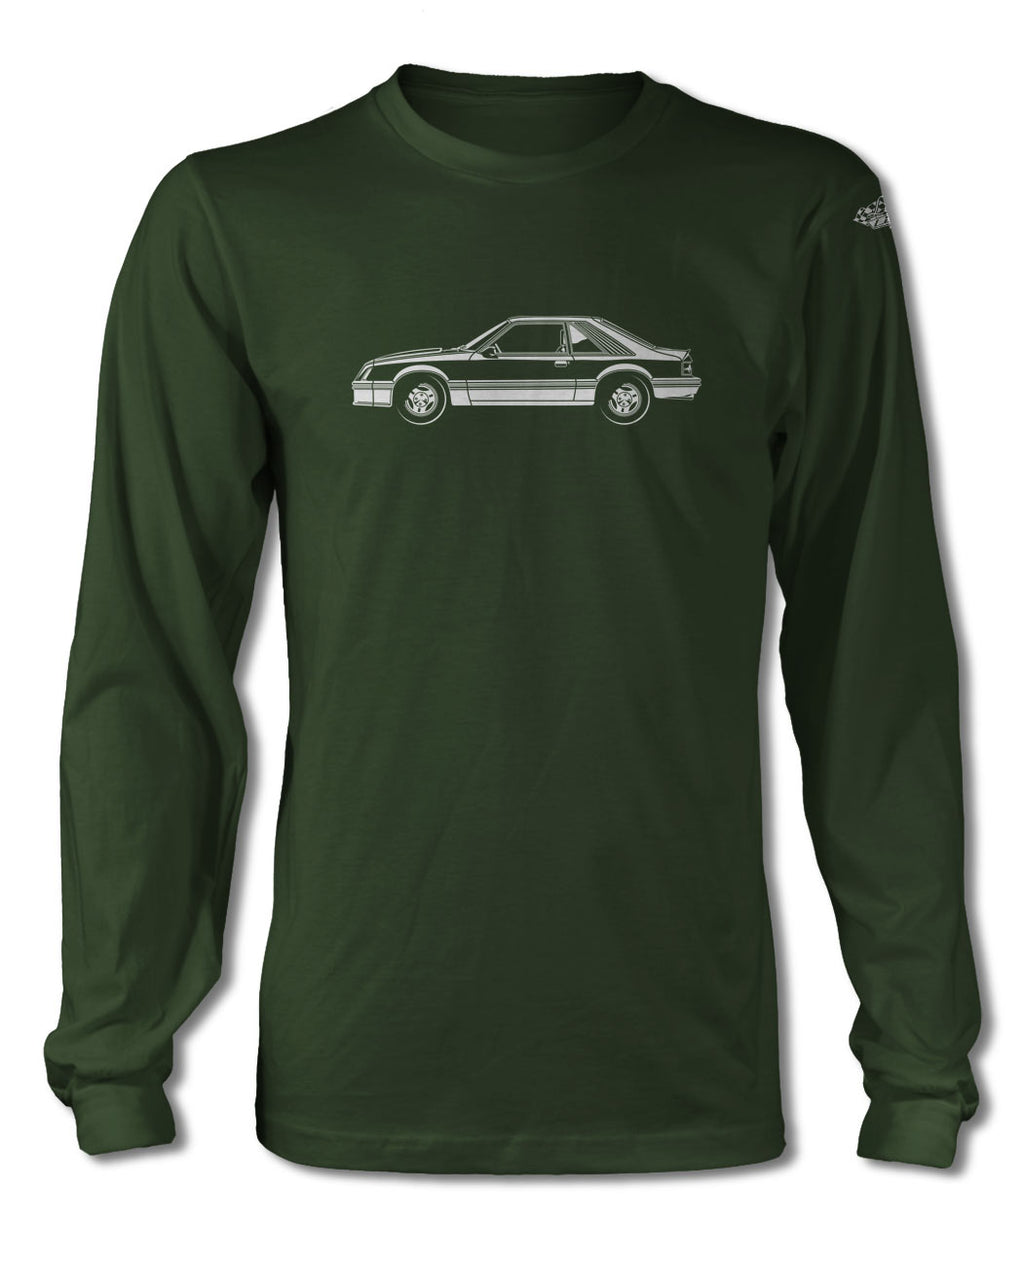 1979 Ford Mustang Turbo Hatchback T-Shirt - Long Sleeves - Side View